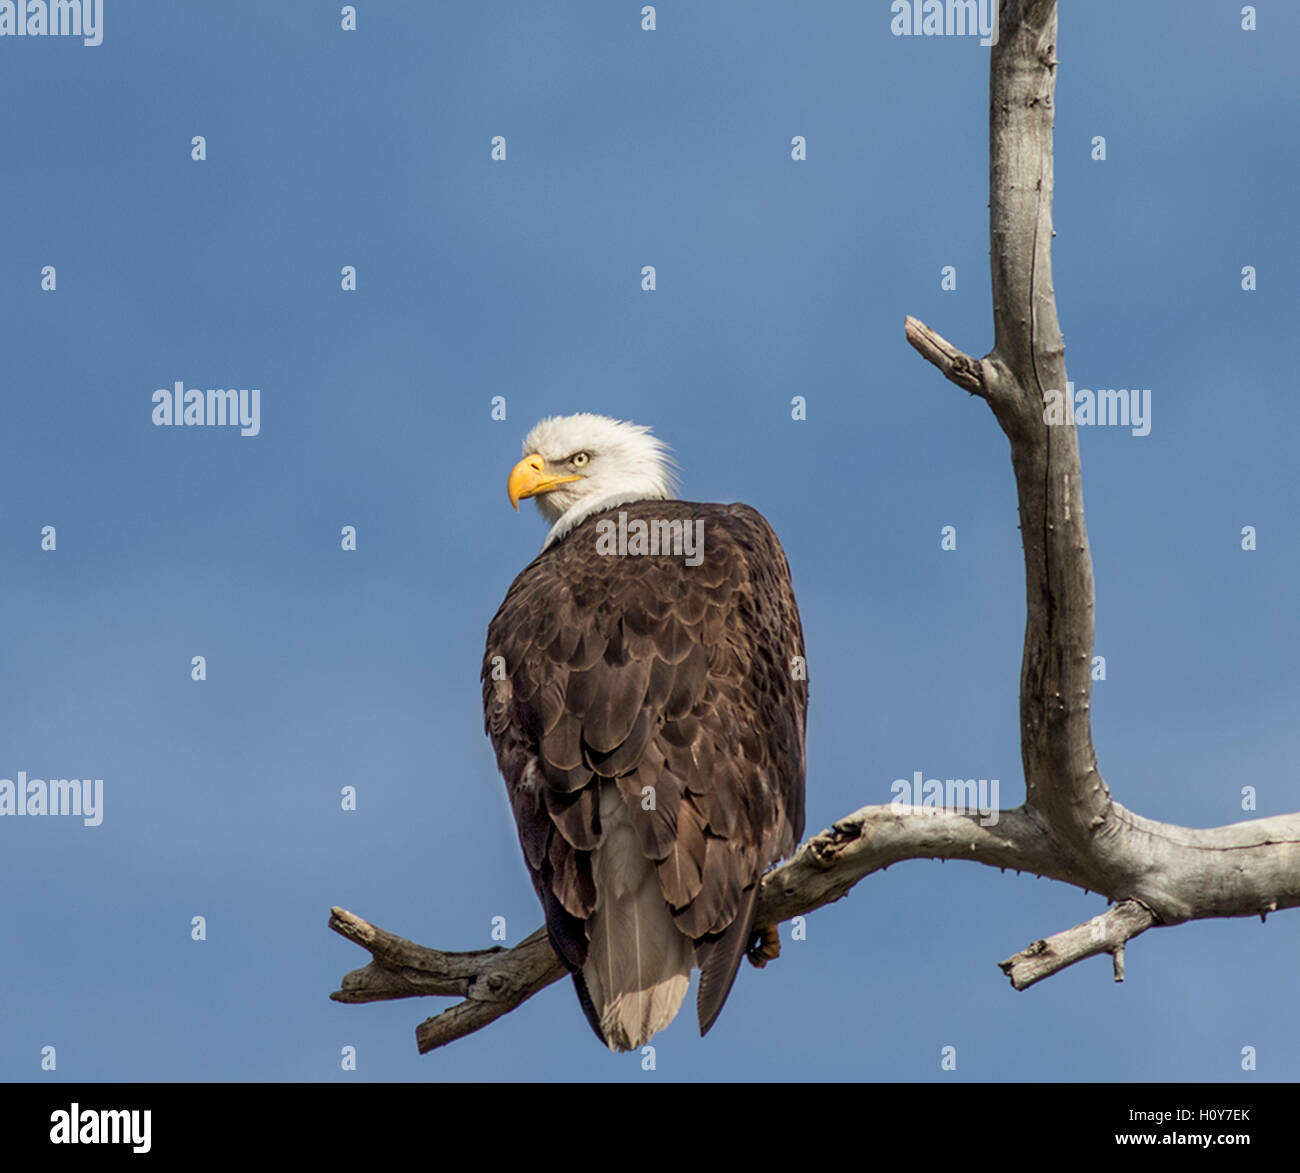 Bald Eagles perched on branch Stock Photo